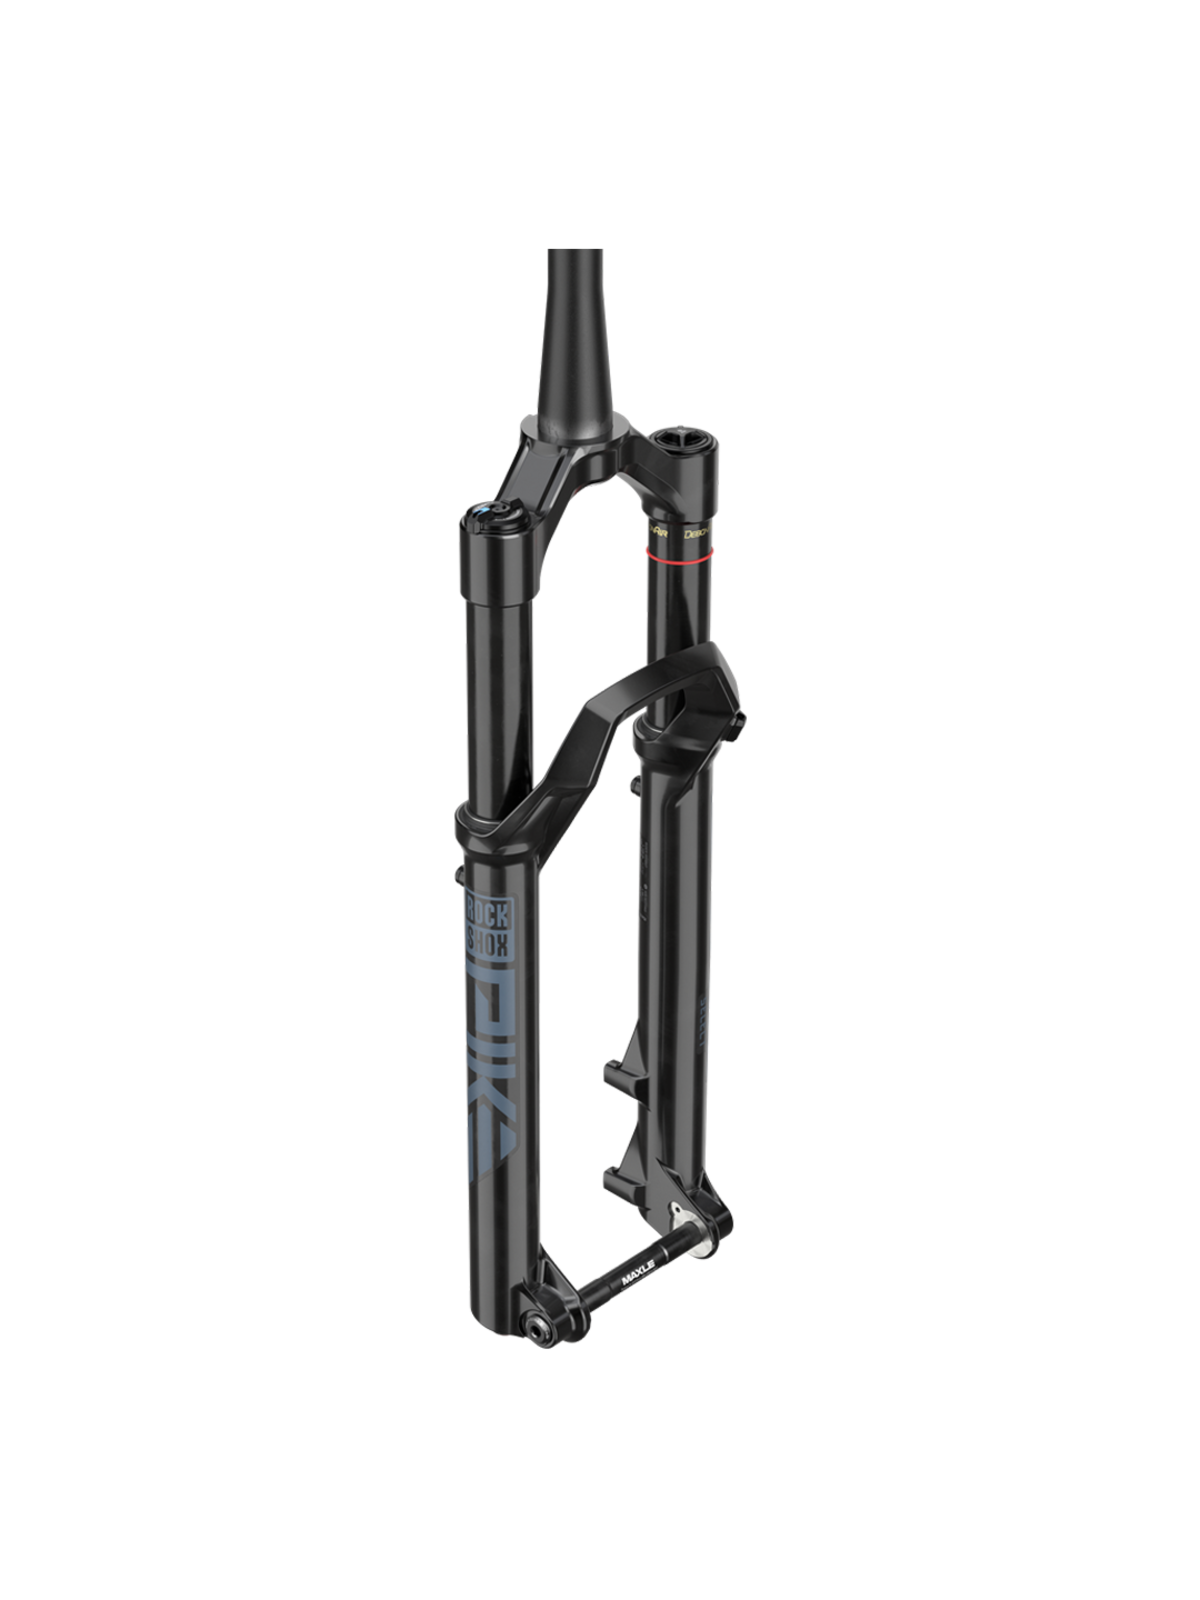 RockShox Pike Select Charger RC 29 Boost MTB Suspension Fork